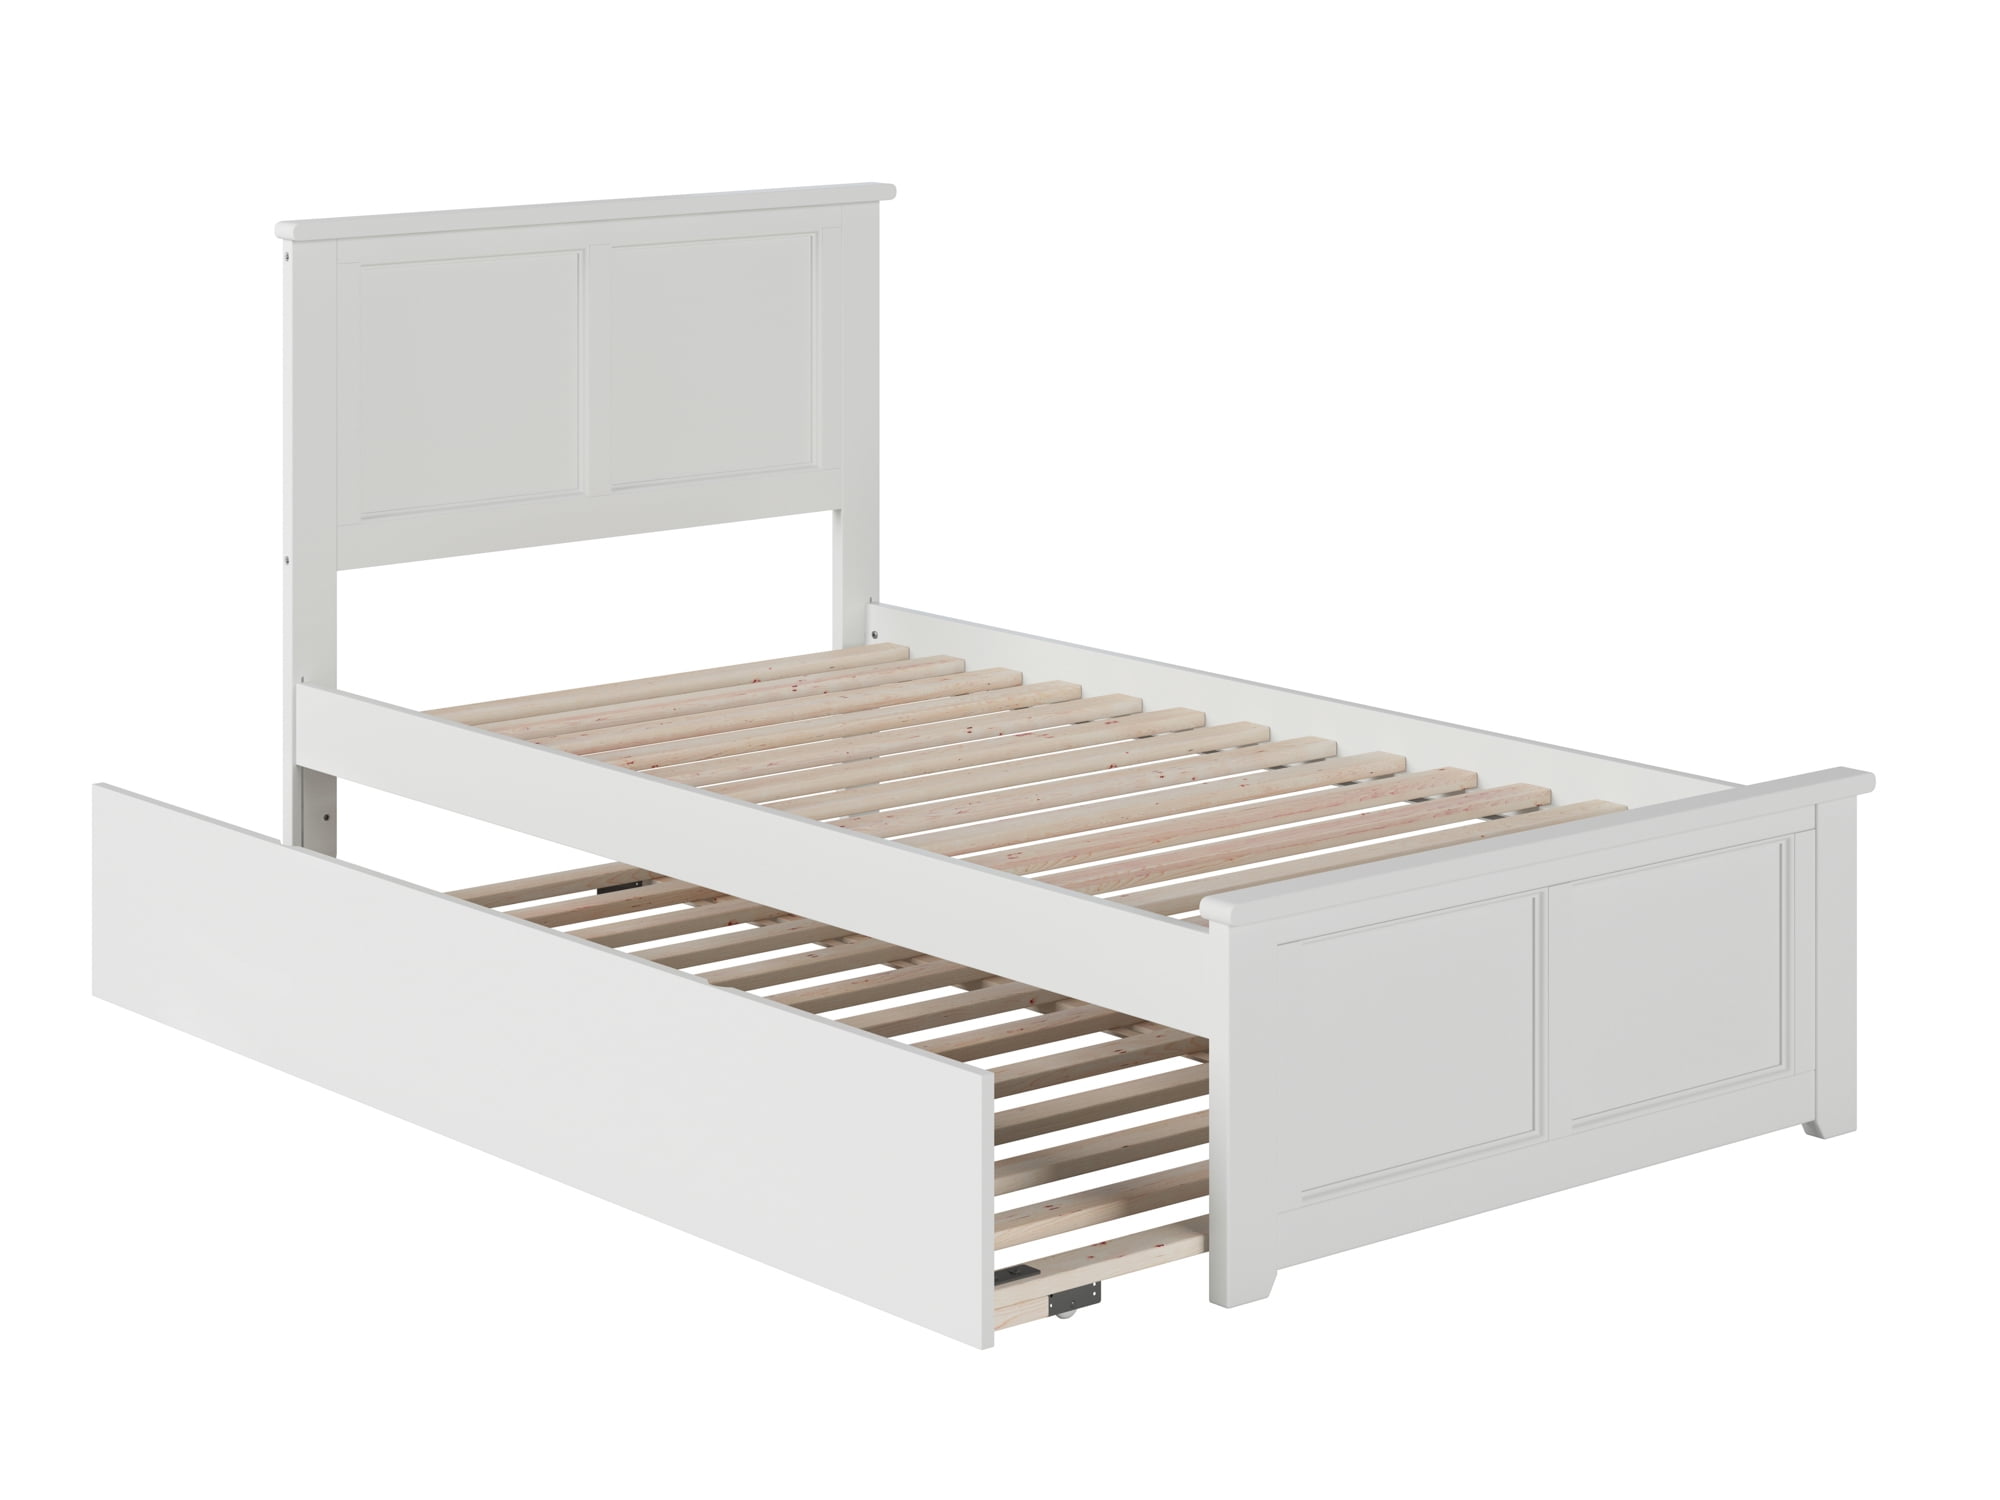 Picture of Atlantic Furniture AR8626012 Madison Match Footboard with Urban Trundle Bed - White, Twin Size